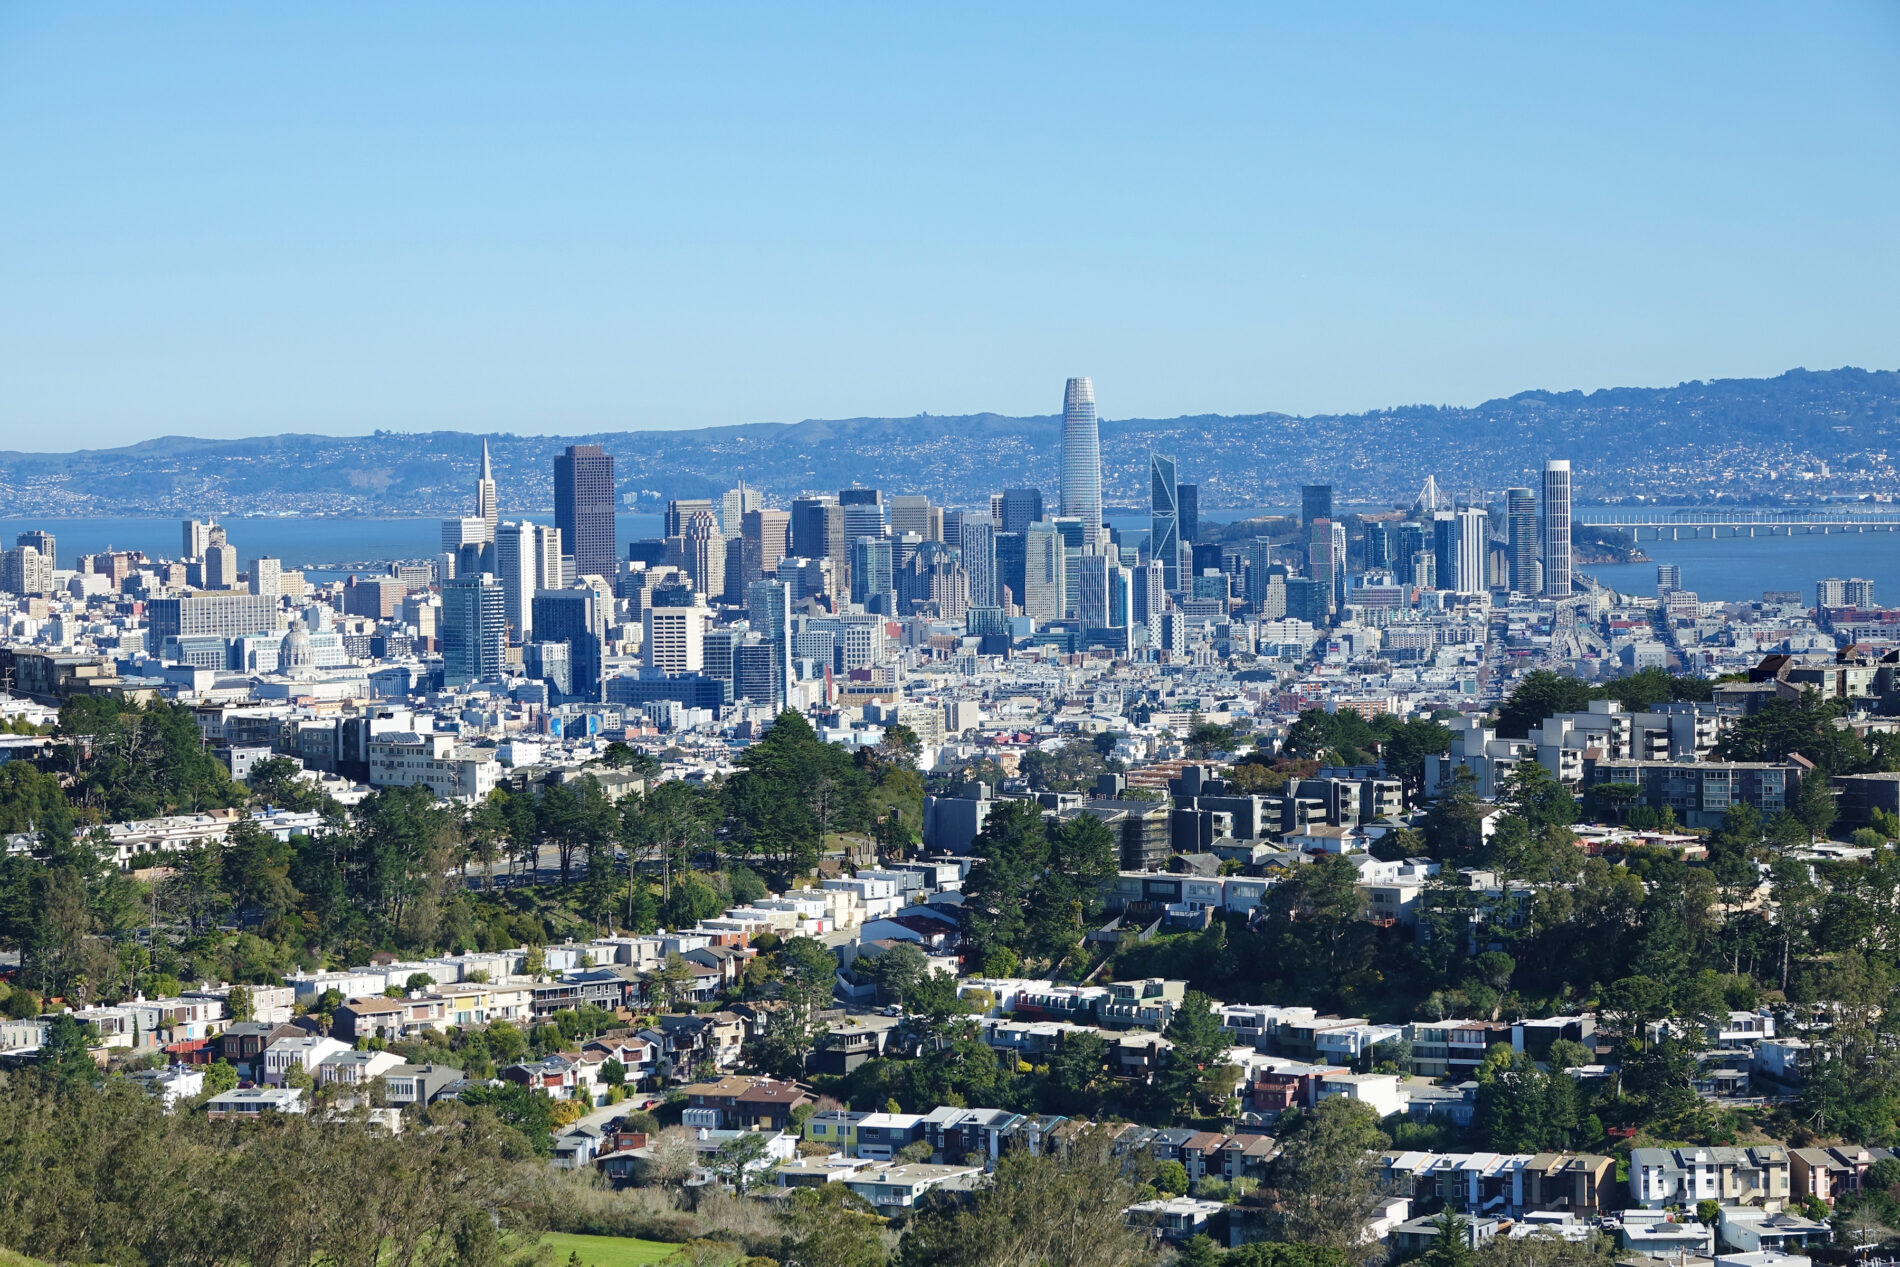 Overlooking San Francisco skyline from viewpoint on Mt. Davidson.